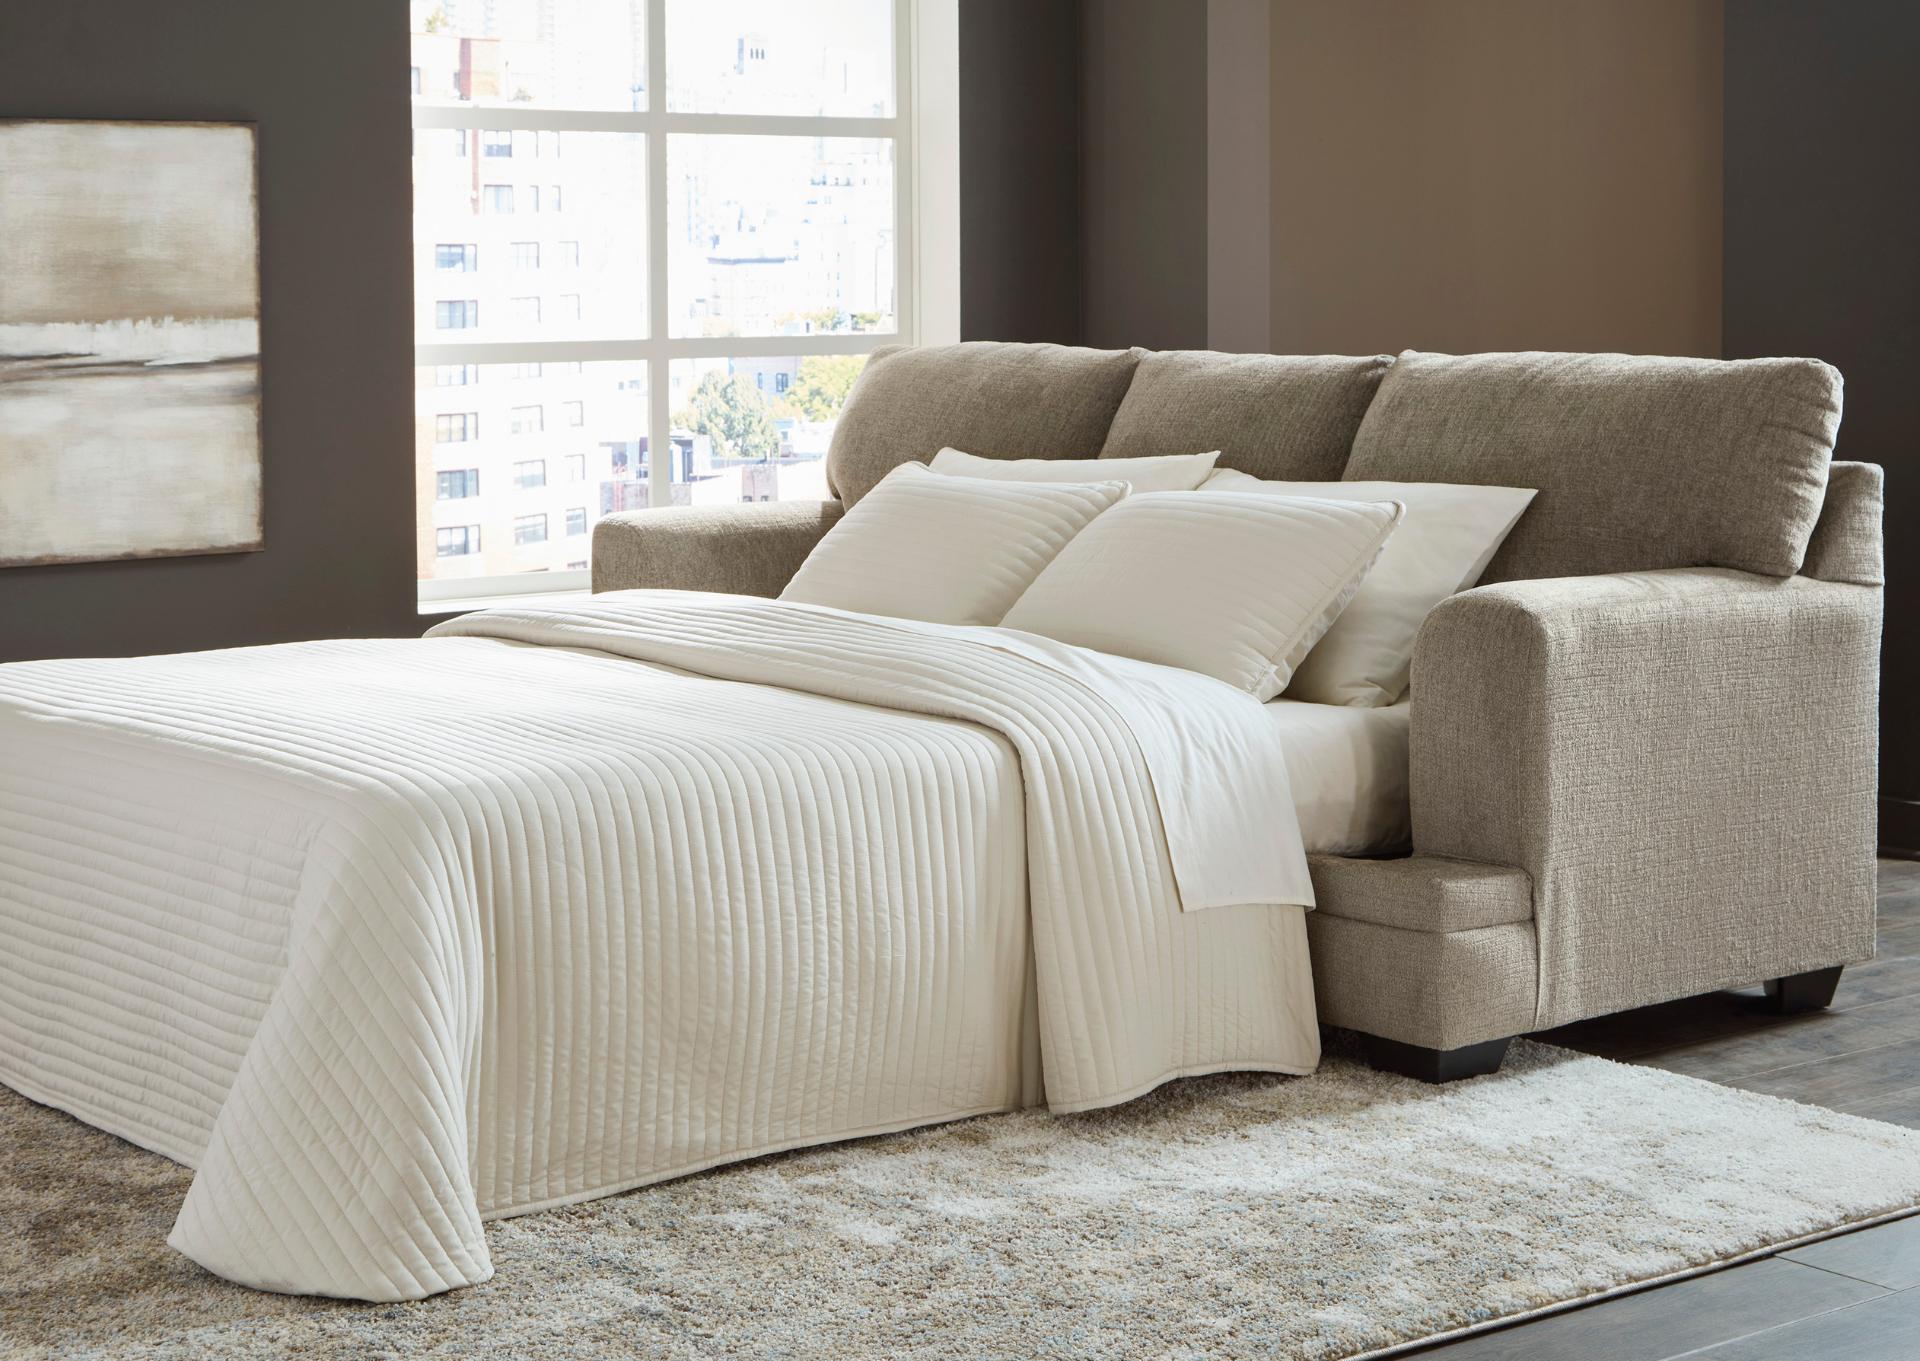 STONEMEADE TAUPE QUEEN SLEEPER,ASHLEY FURNITURE INC.